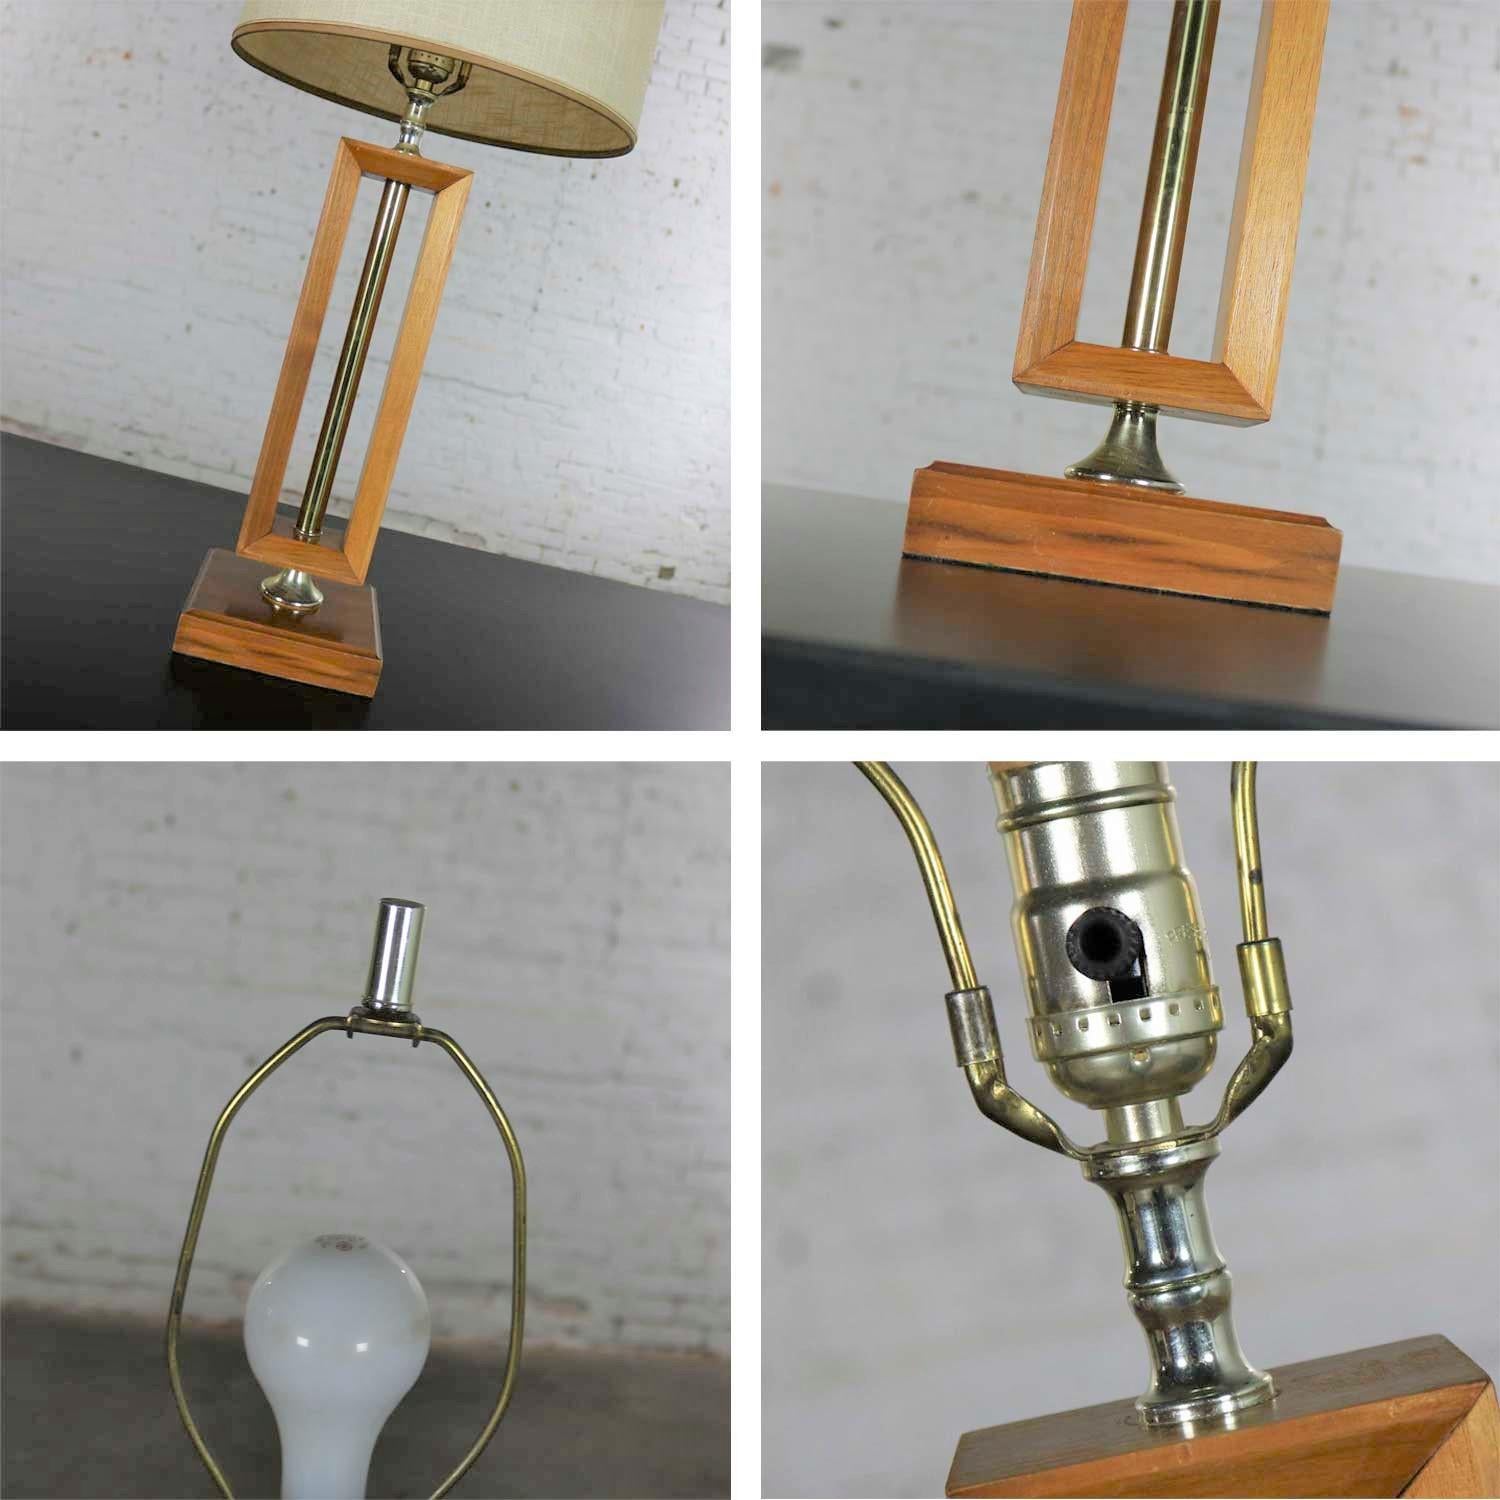 Small Scale Mid-Century Modern Walnut and Brass Lamp Style of Laurel Lamp Mfg For Sale 5